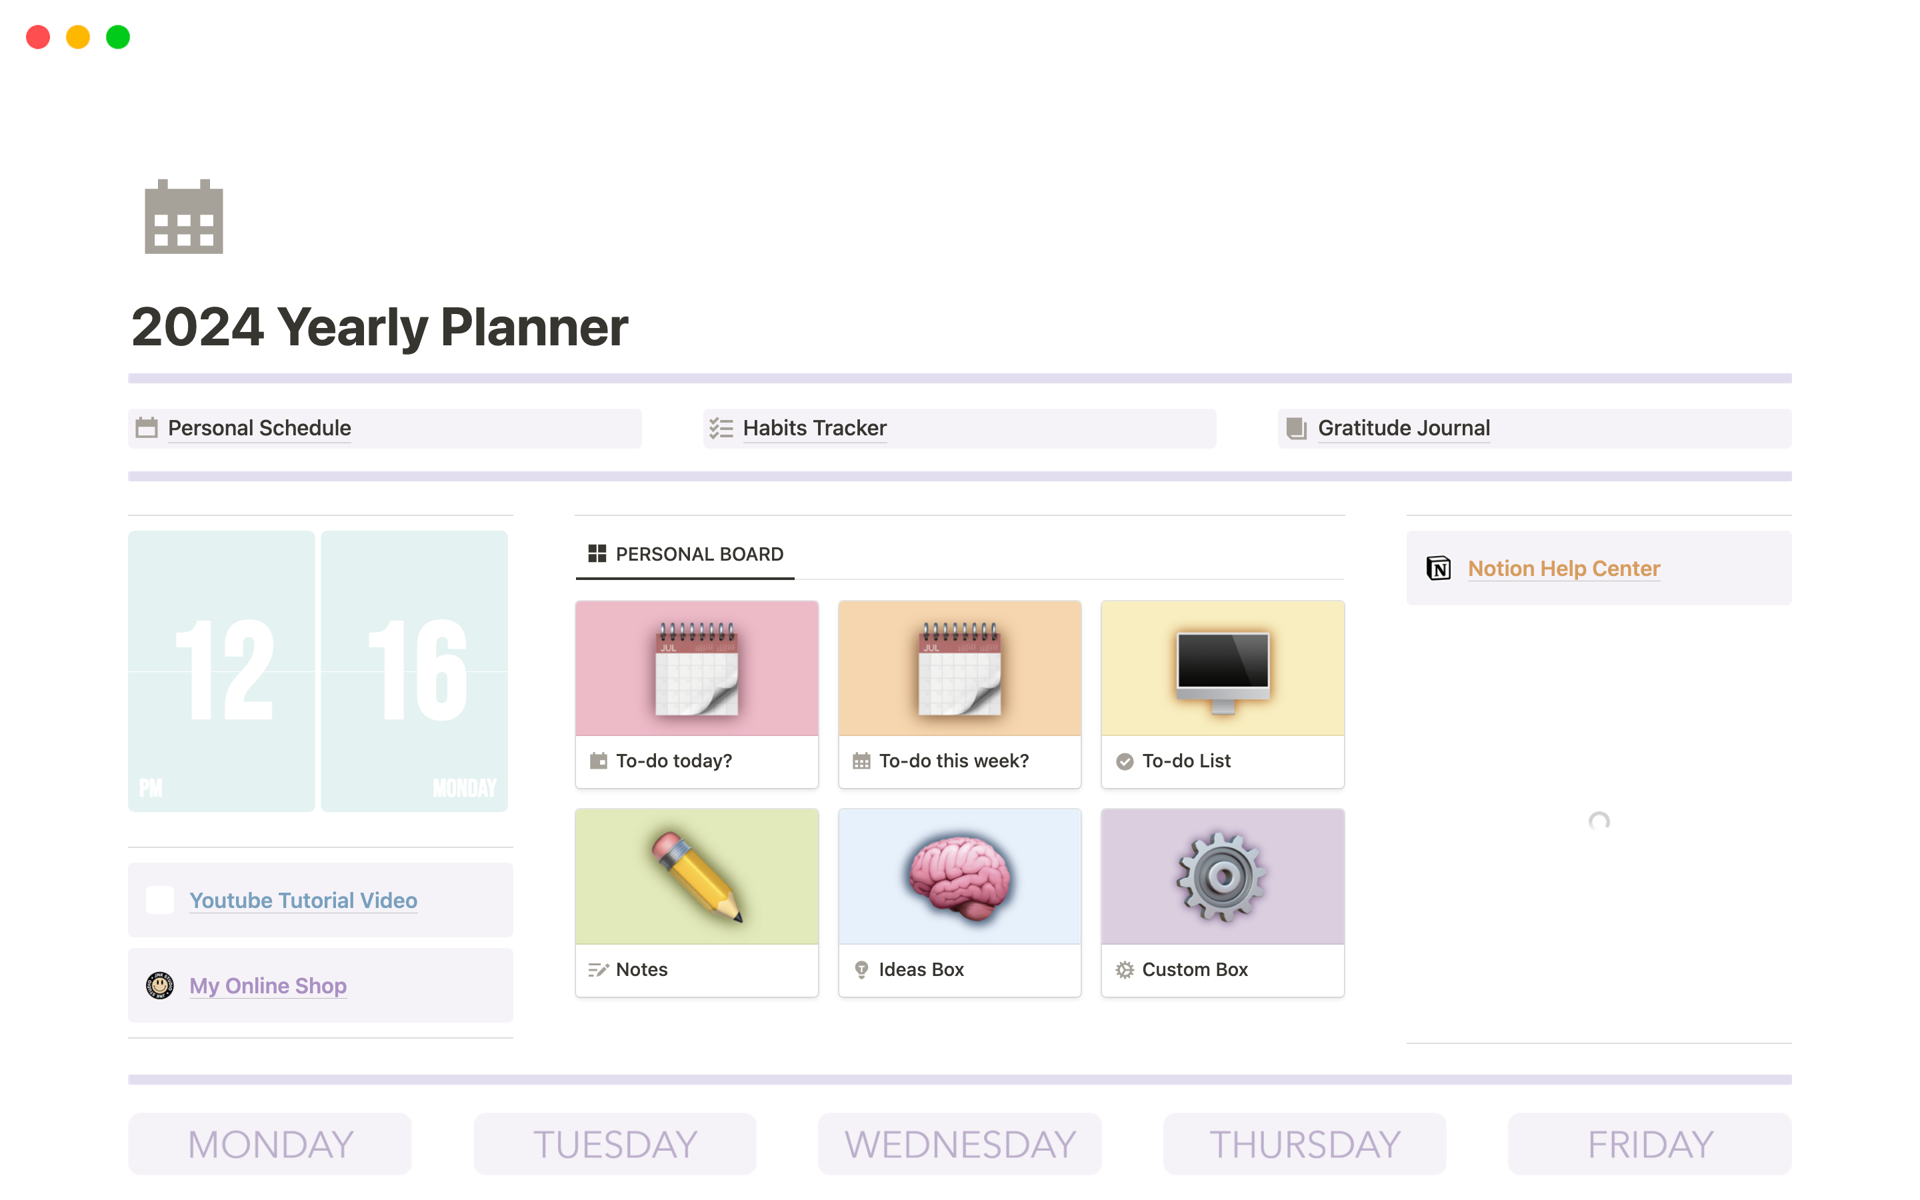 A digital planner designed for the upcoming 2024 year, ensuring a positive start to the new year!